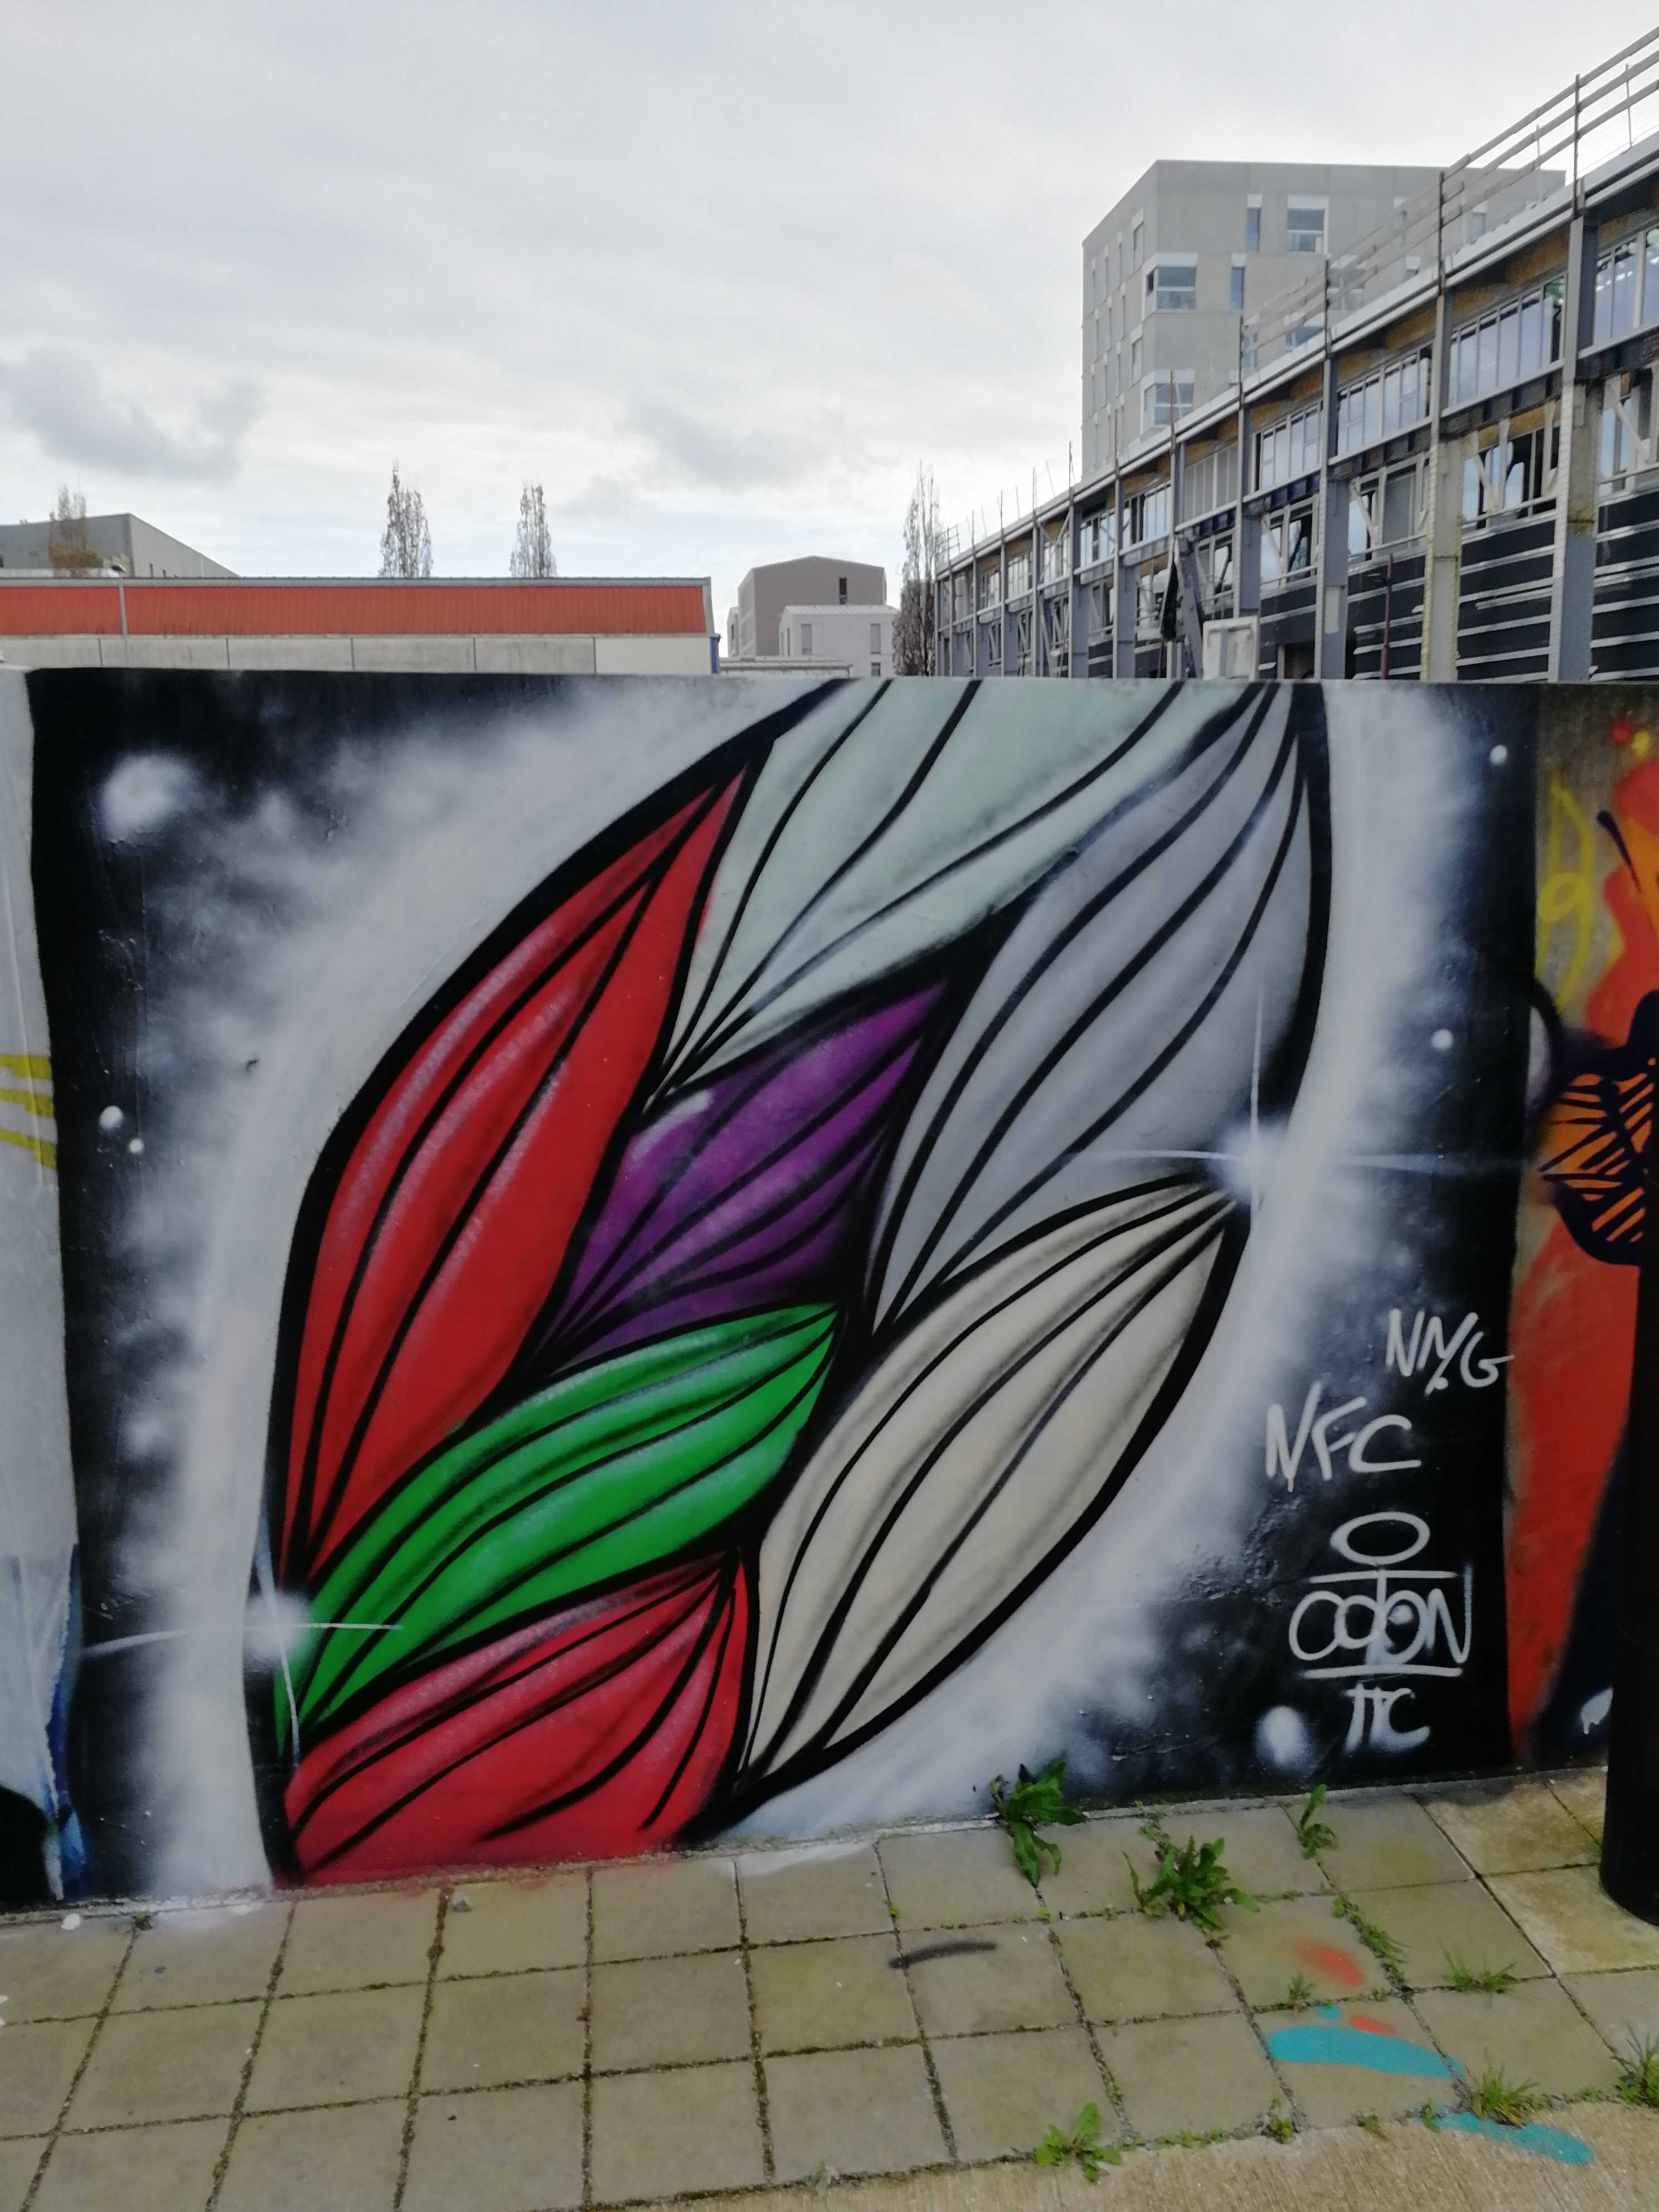 Graffiti 3826  captured by Rabot in Nantes France